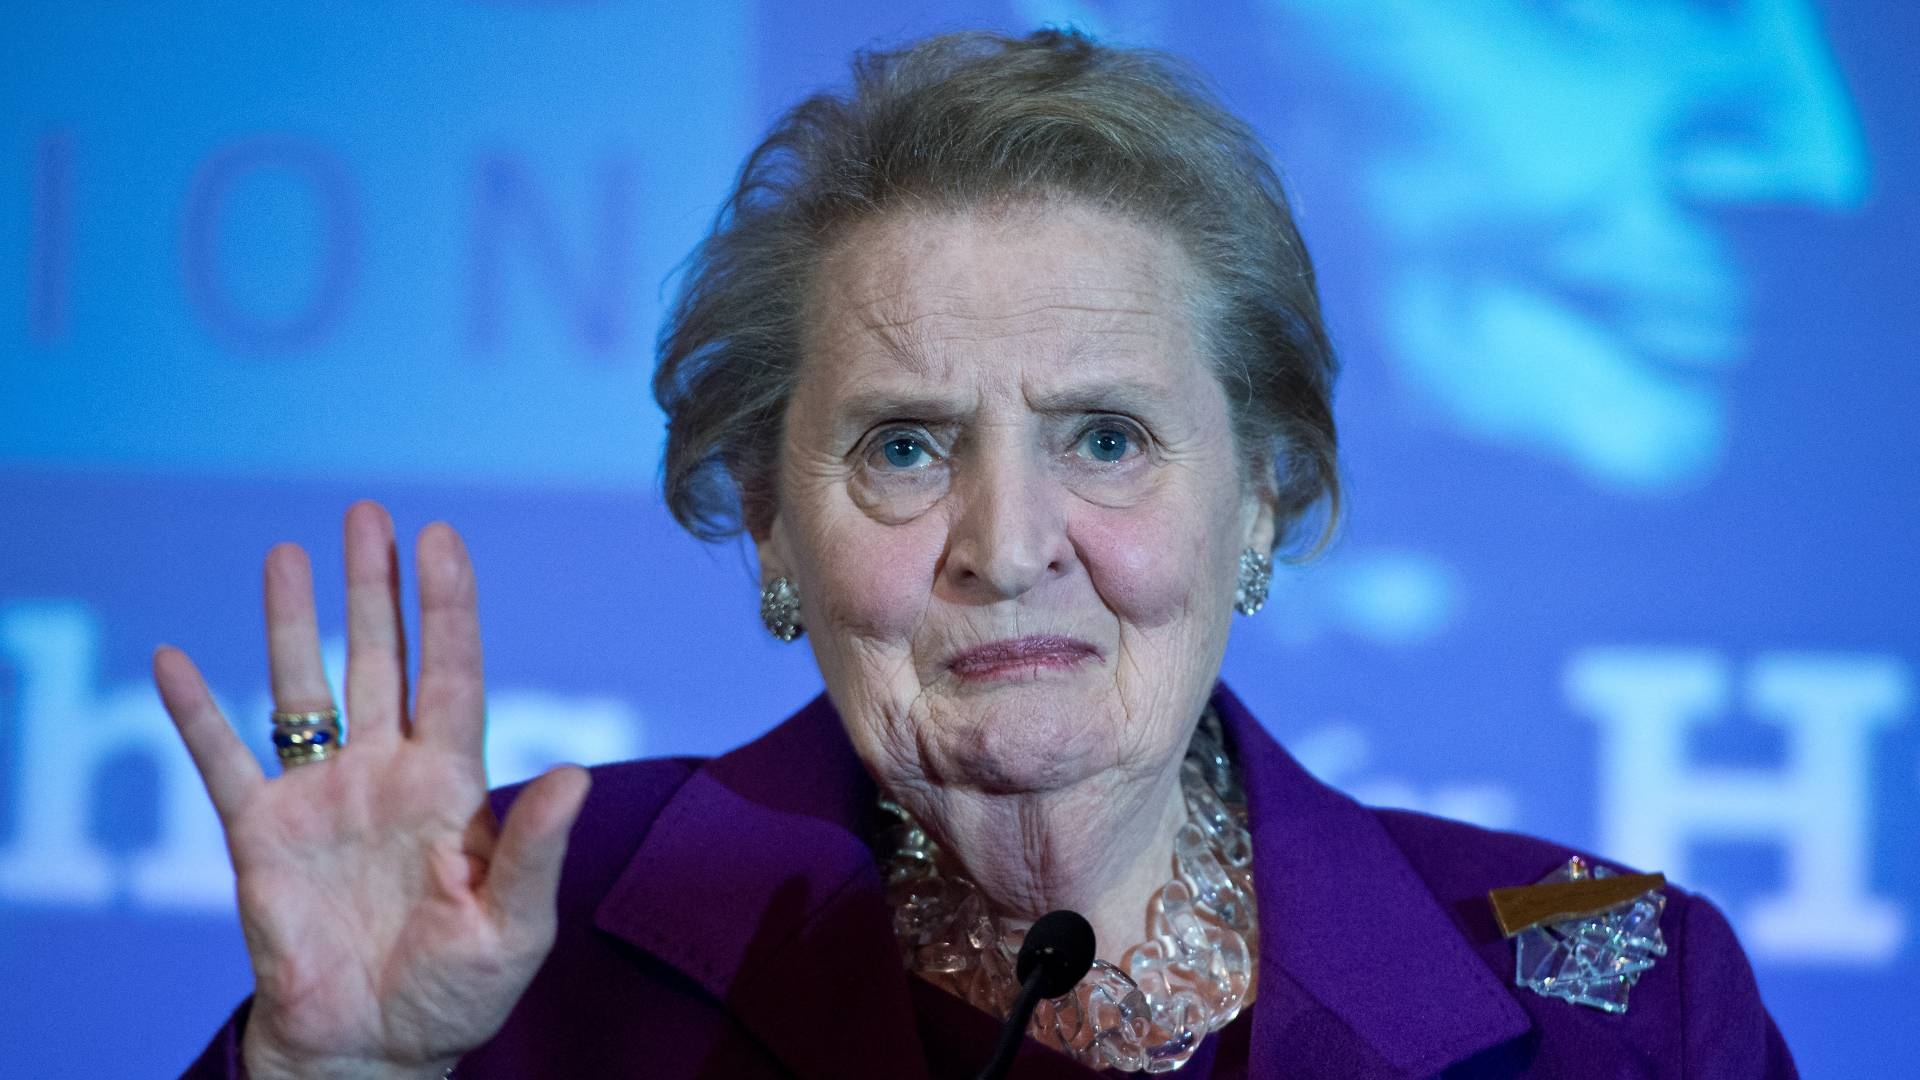 Albright died at the age of 84 from cancer, according to her family